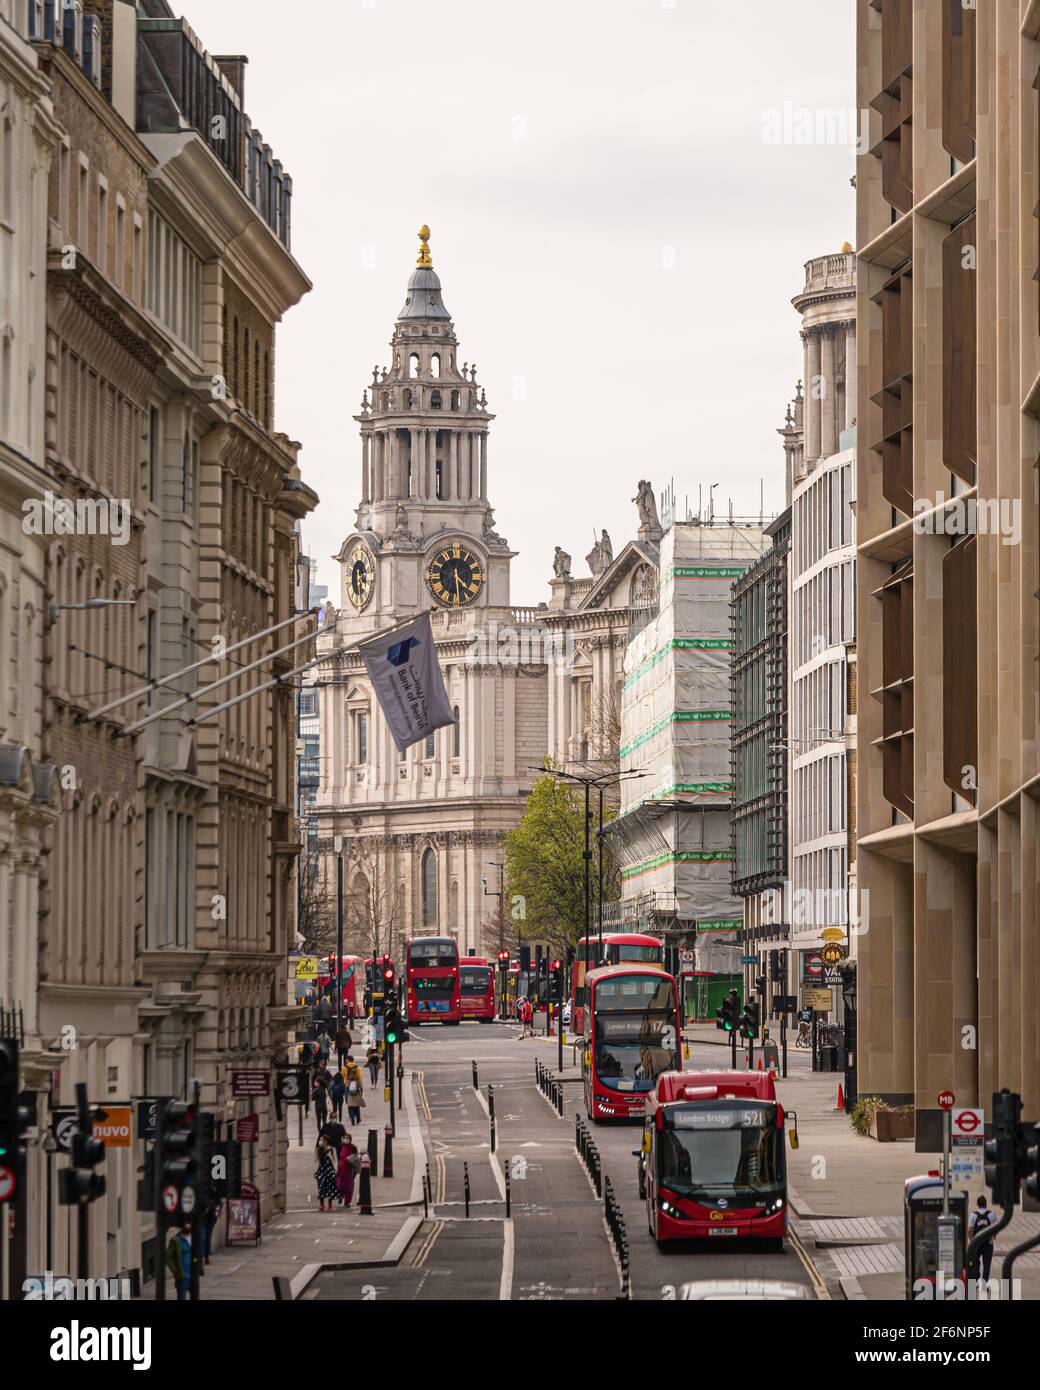 Looking down Cannon Street towards St Pauls Cathedral, London, UK Stock Photo